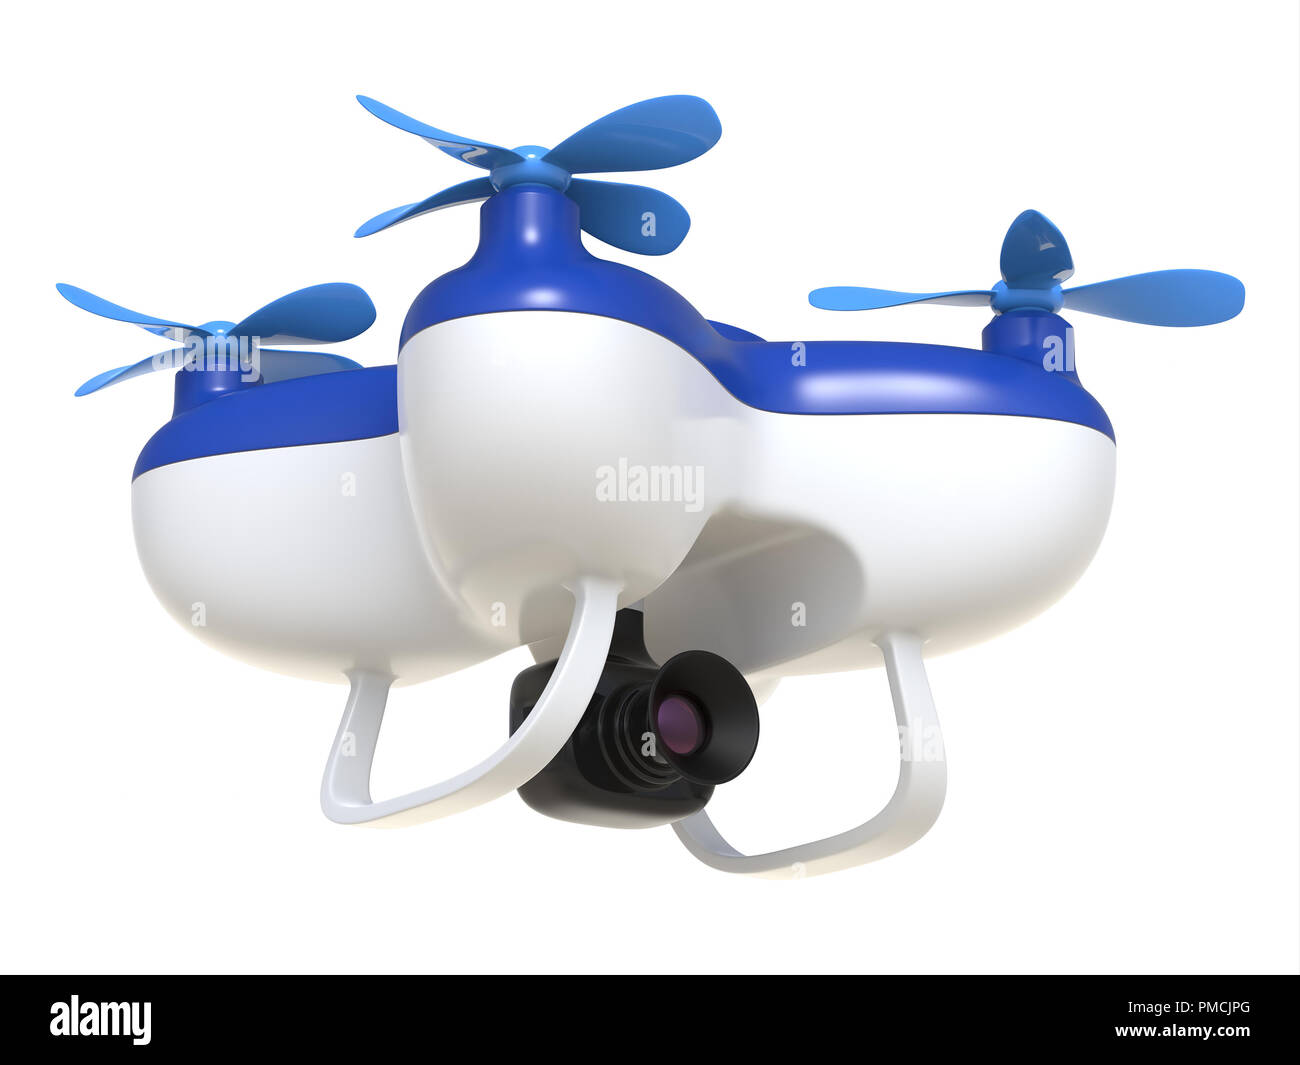 Abstract toy quadcopter drone with camera isolated on white background. 3D rendering. Stock Photo